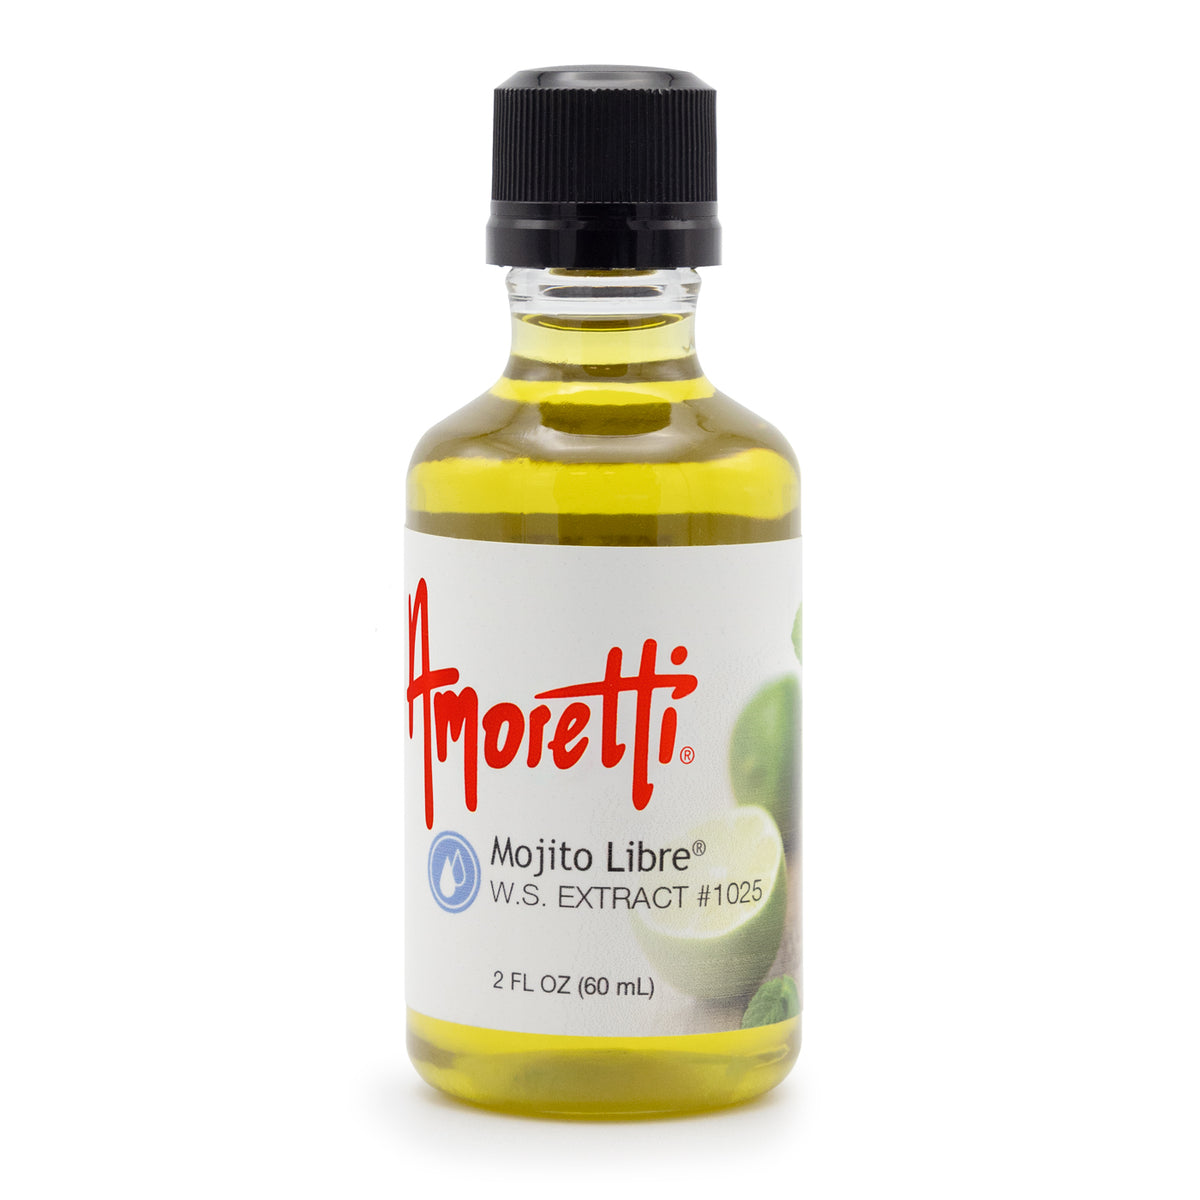 Mojito Libre Extract Water lime) & — (mint Amoretti Soluble